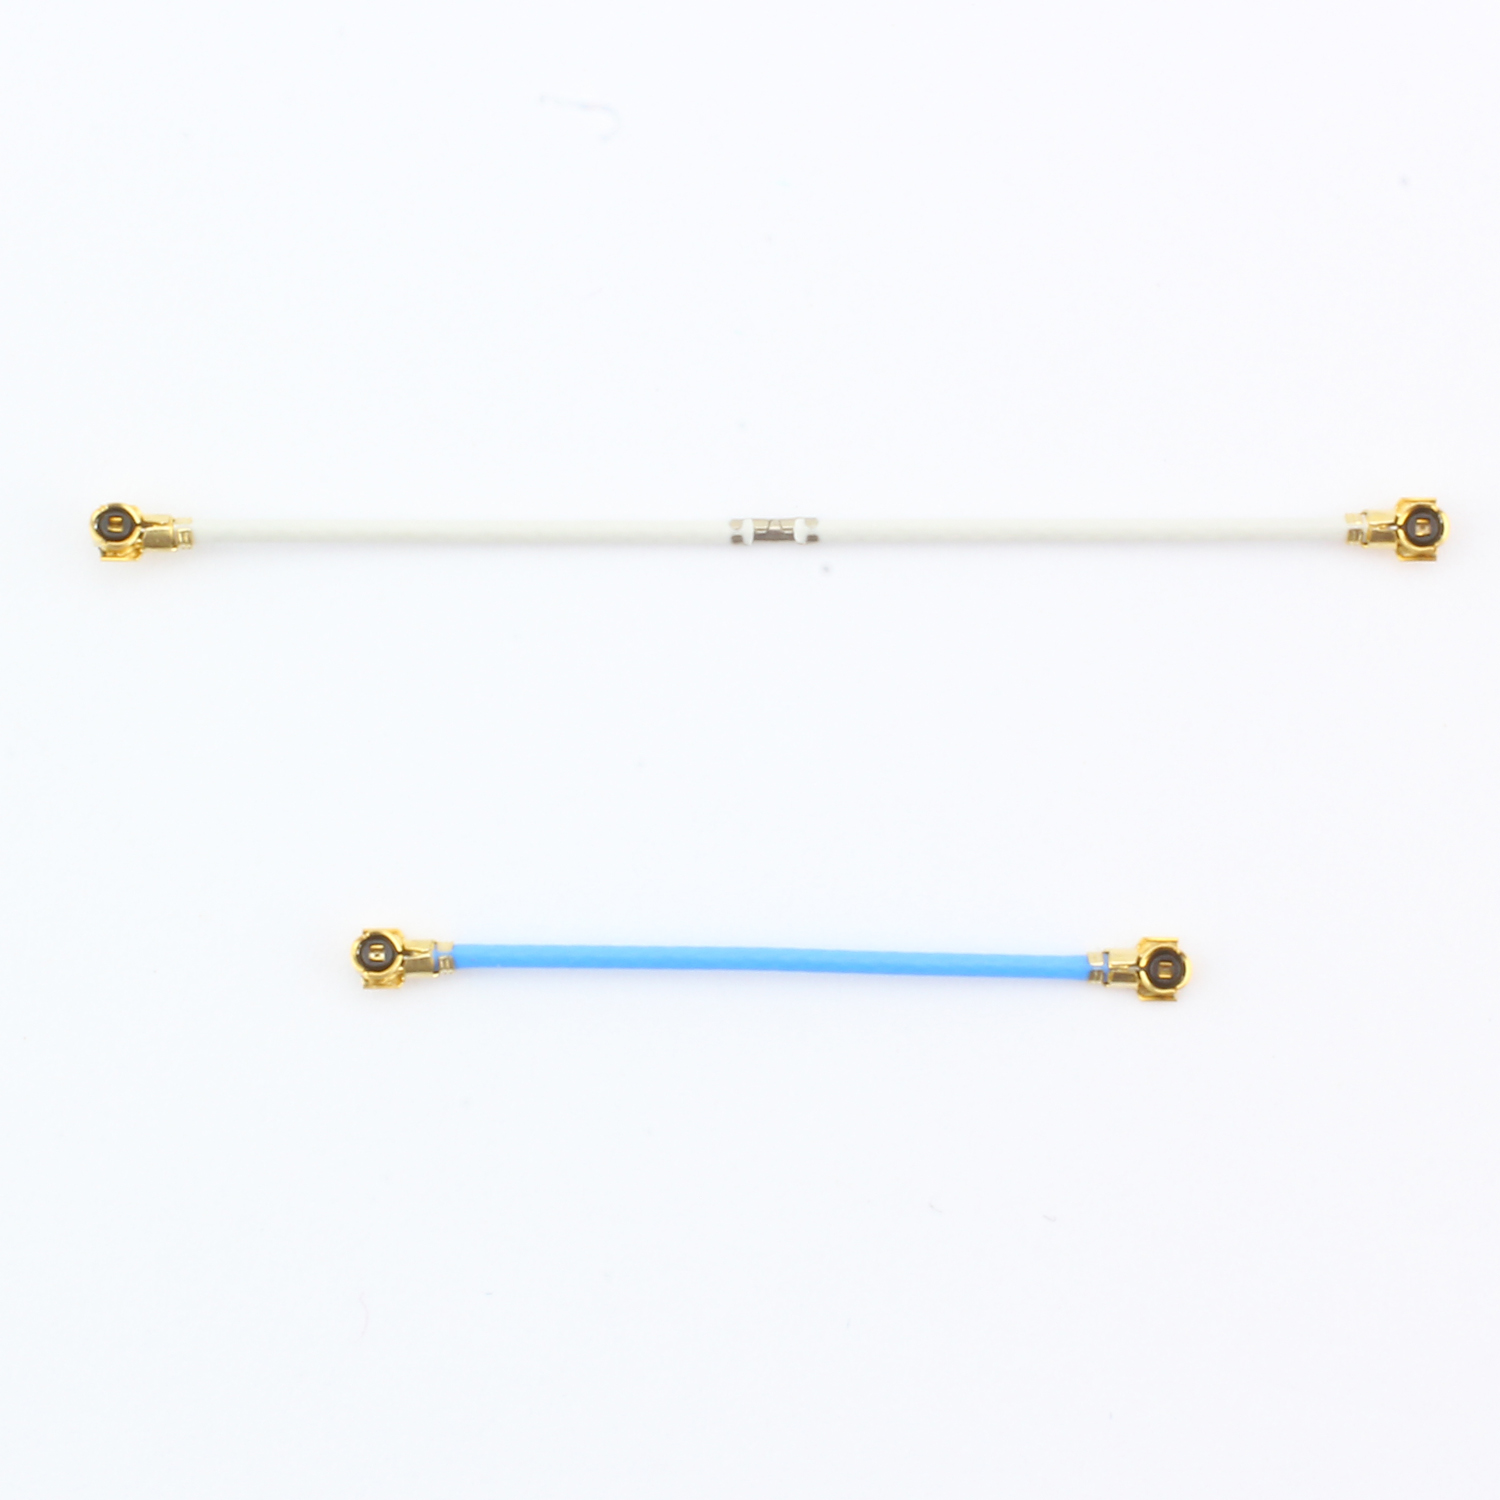 LTE Coaxial Cable compatible with Samsung Galaxy Note 8 N950